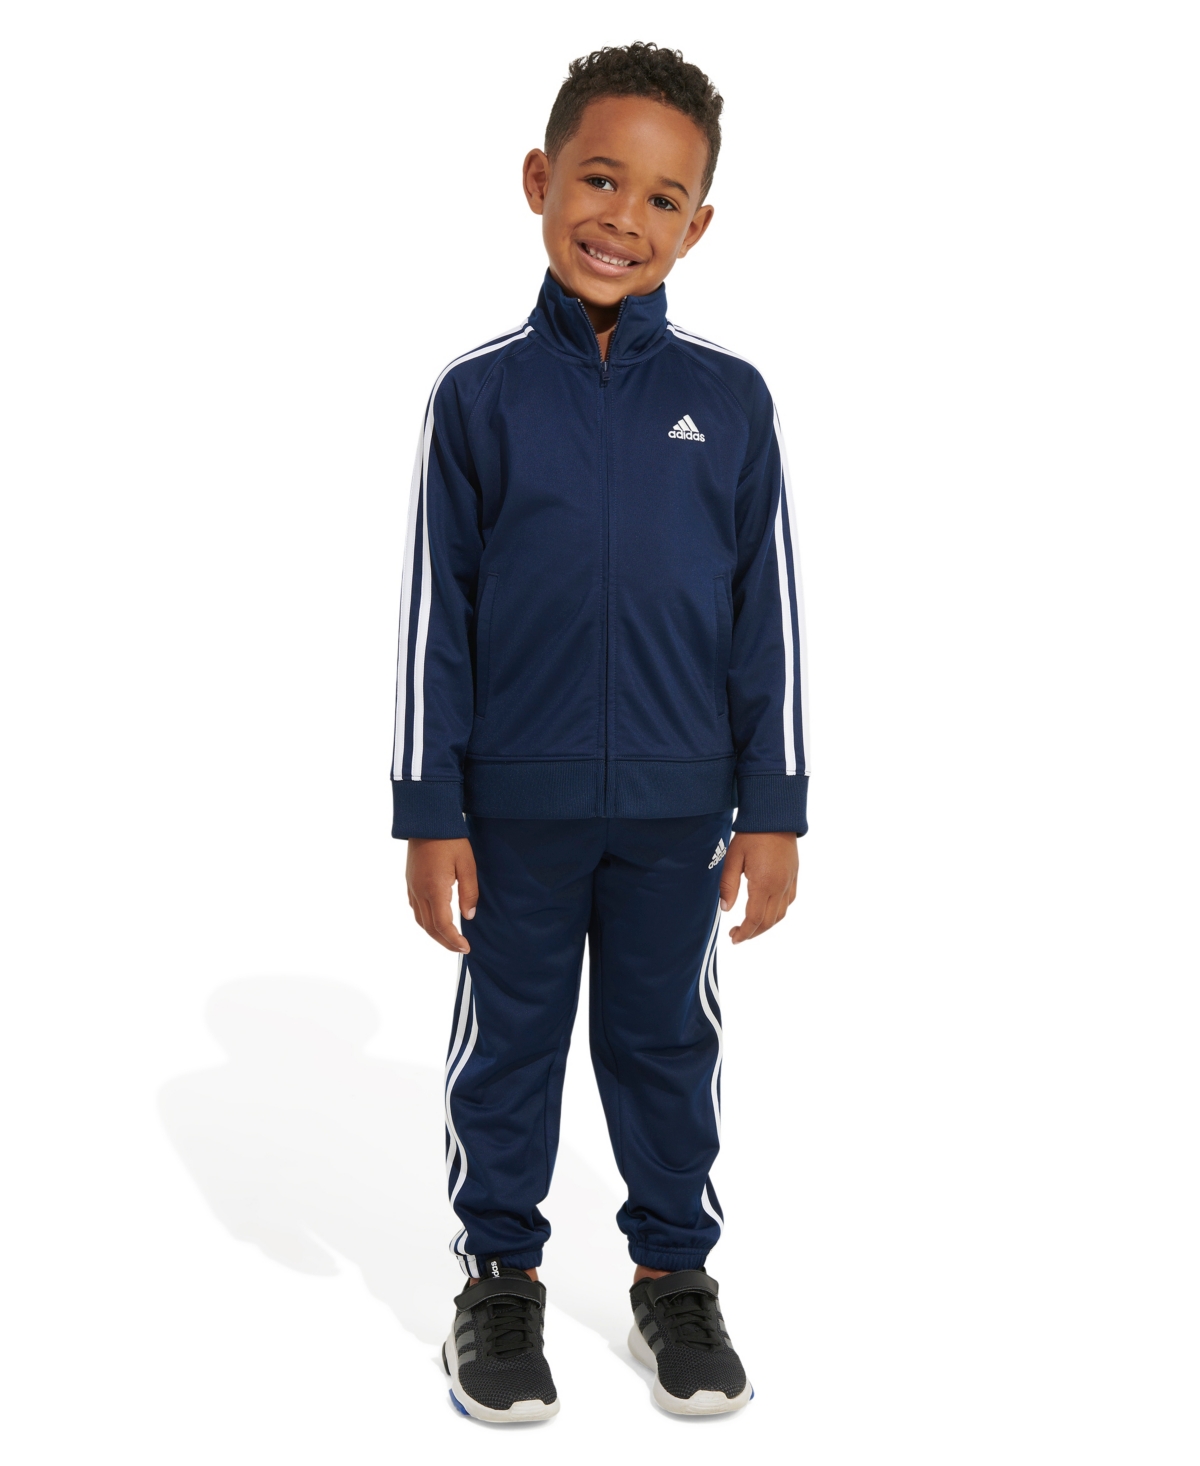 Adidas Originals Kids' Toddler Boys Tricot Jacket And Jogger Pants, 2-piece Set In Collegiate Navy